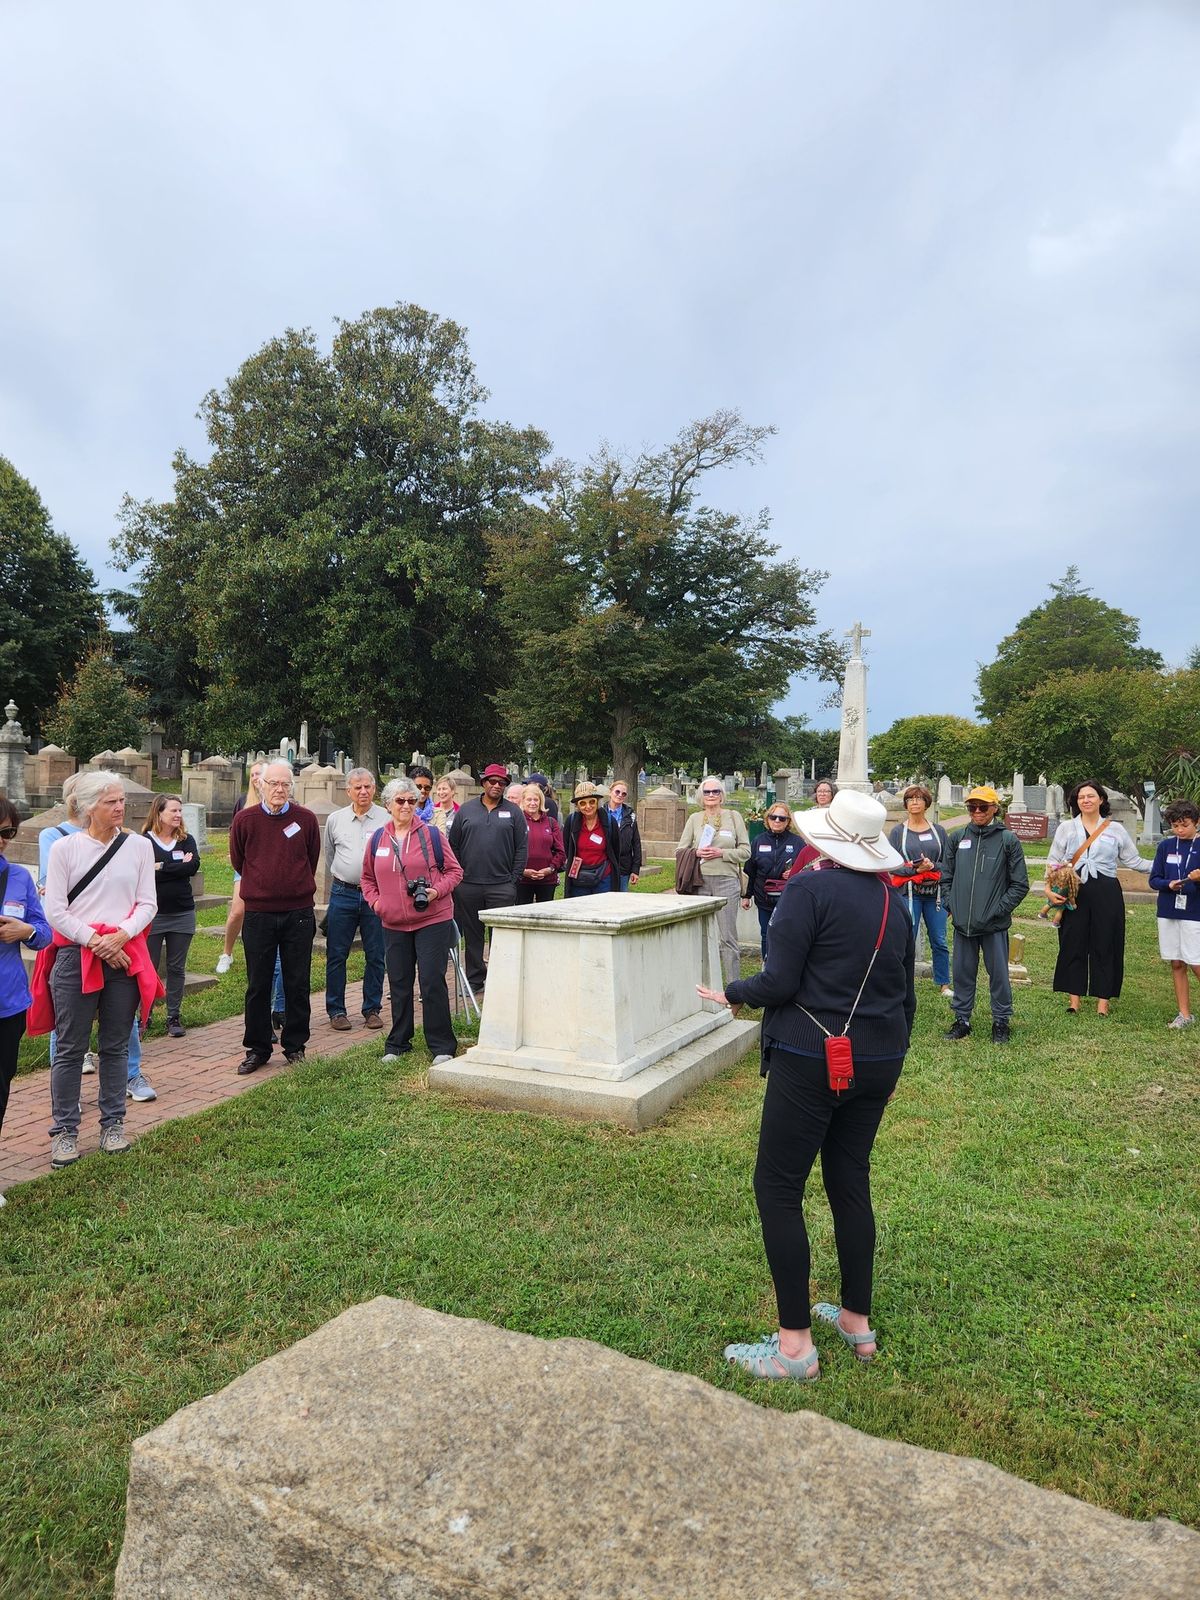 Only at Congressional : Guided Cemetery Tours